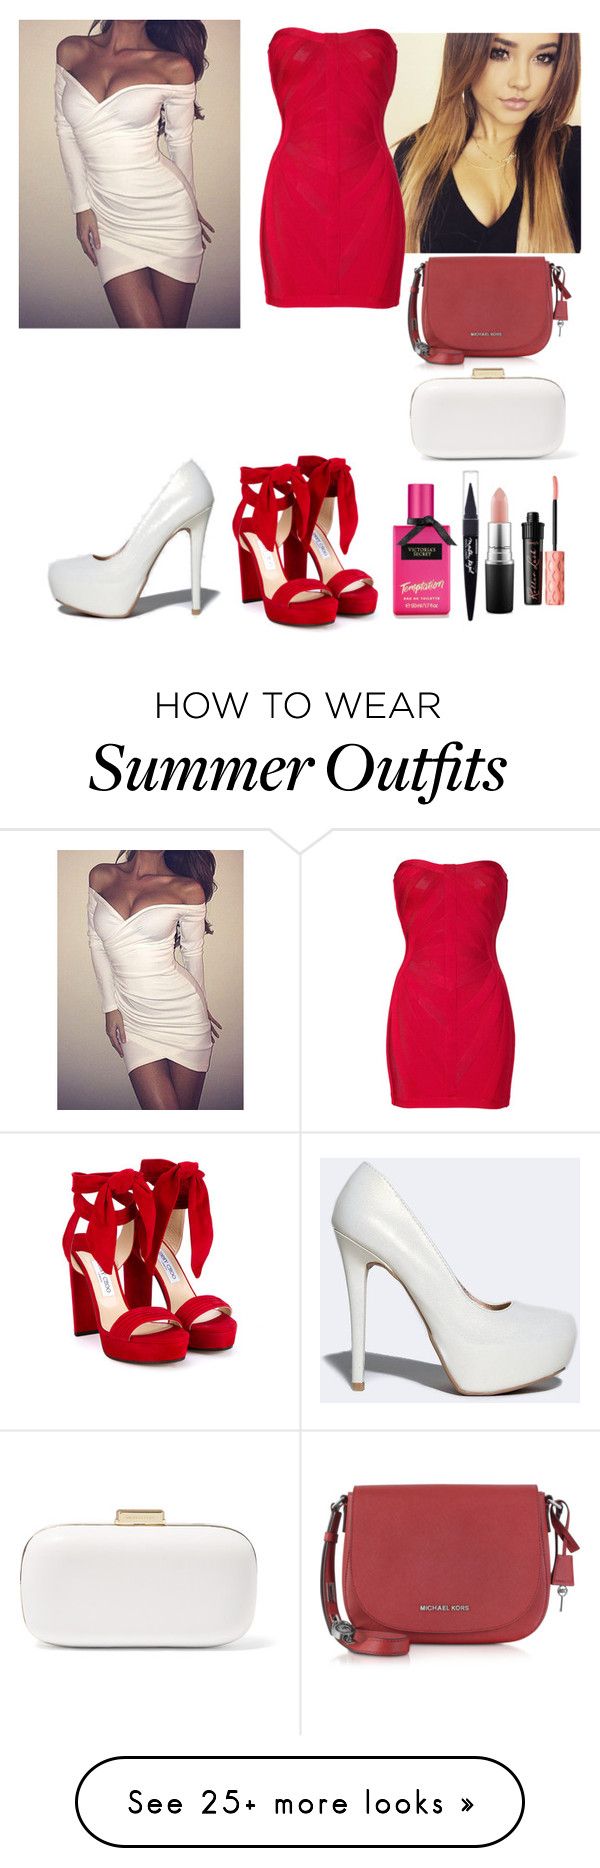 "whitney | party & date night outfits | summer lookbook" by mariea...